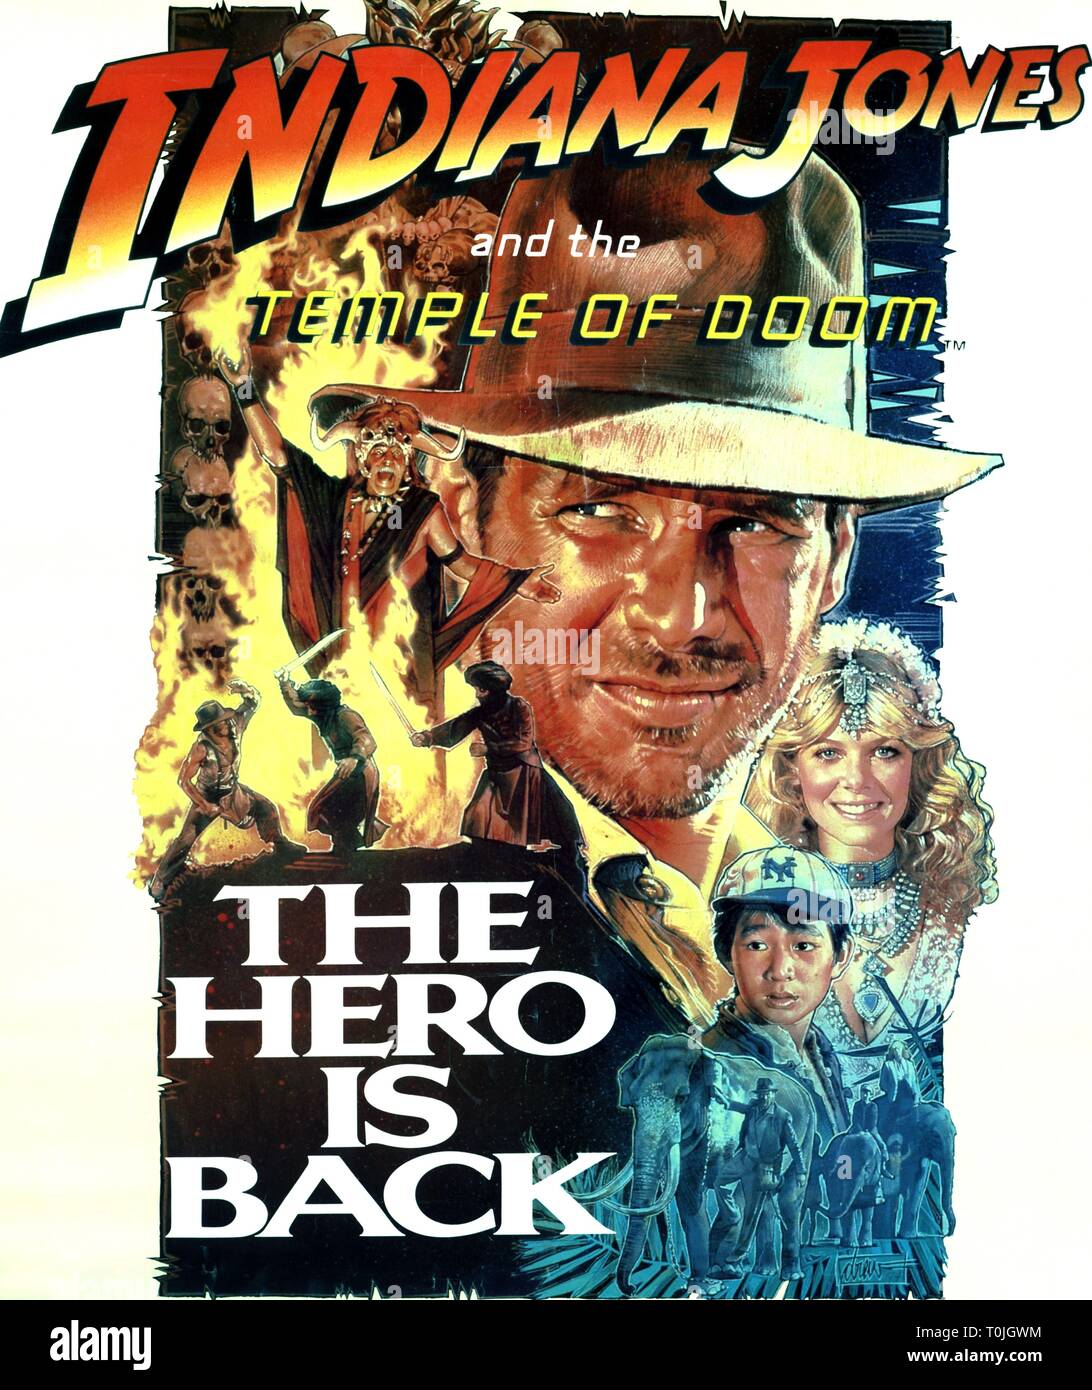 FILM POSTER, INDIANA JONES AND THE TEMPLE OF DOOM, 1984 Stock Photo